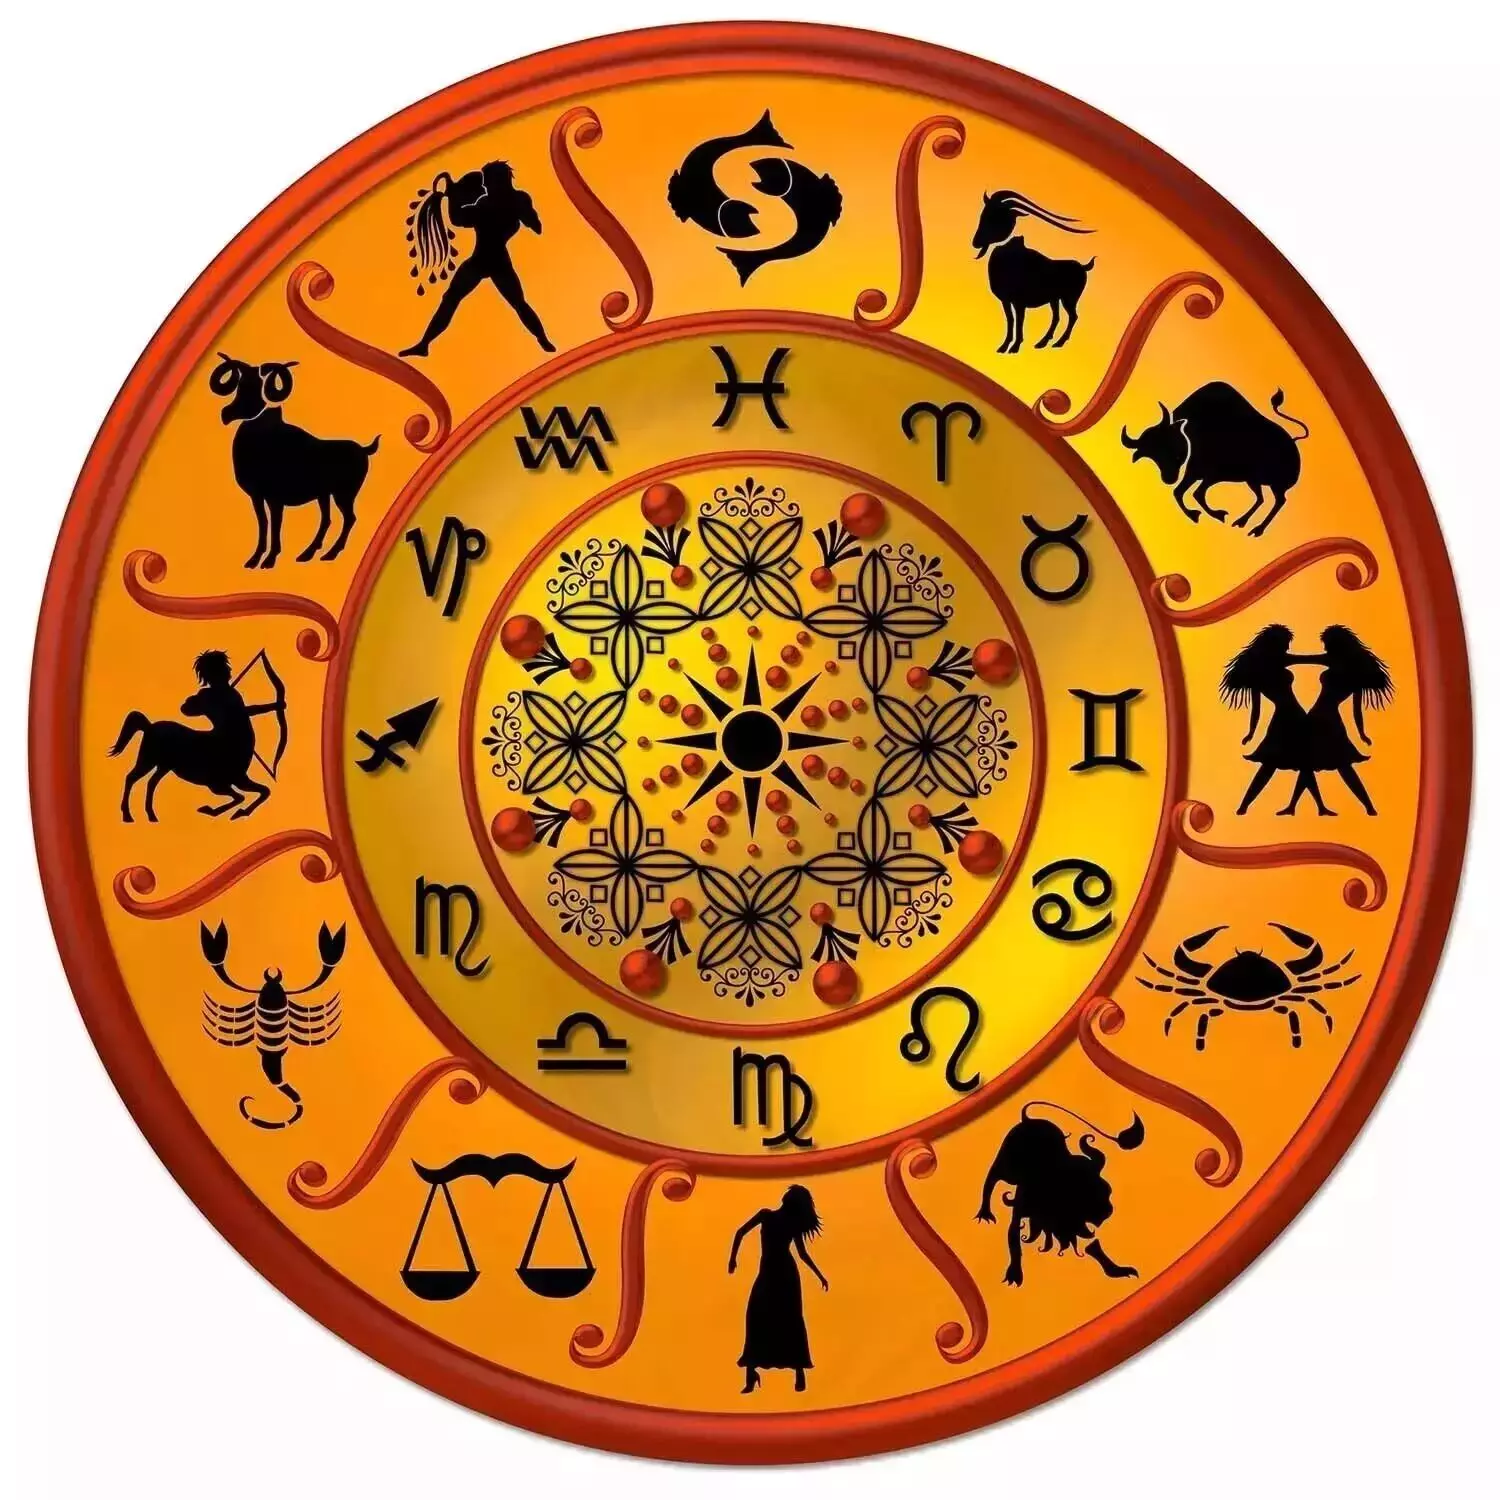 23 February  – Know your todays horoscope